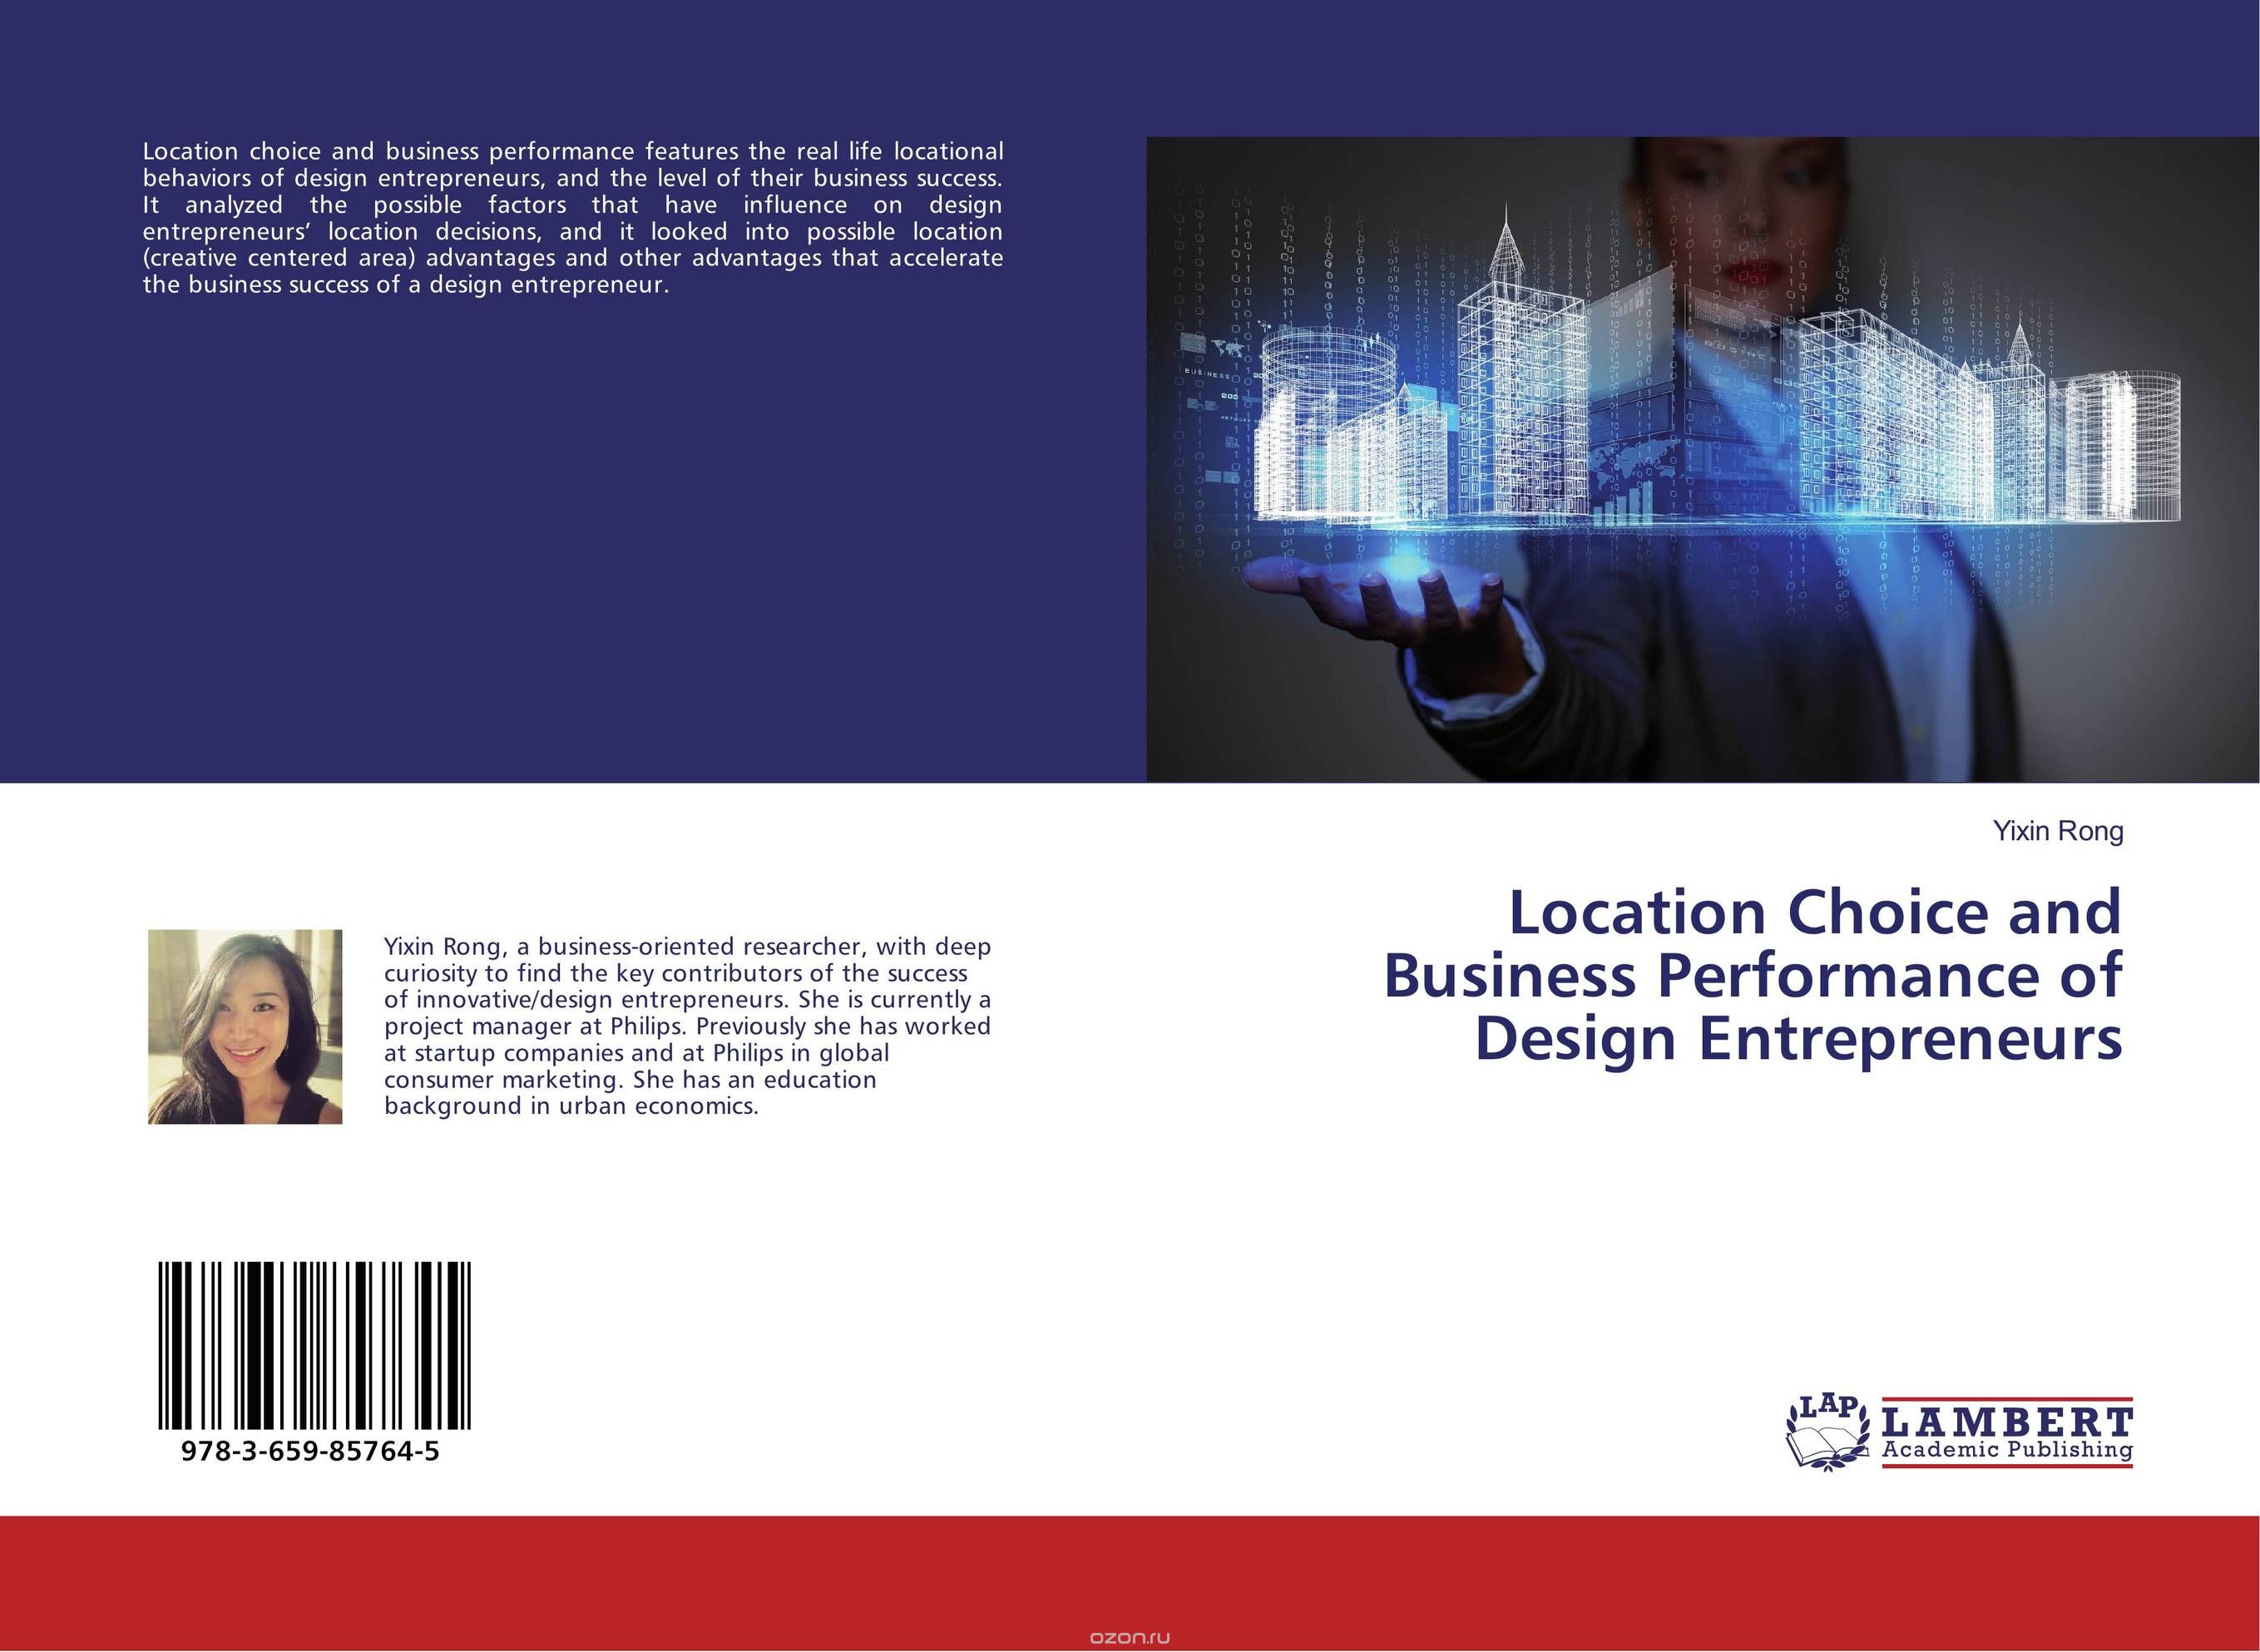 Location Choice and Business Performance of Design Entrepreneurs